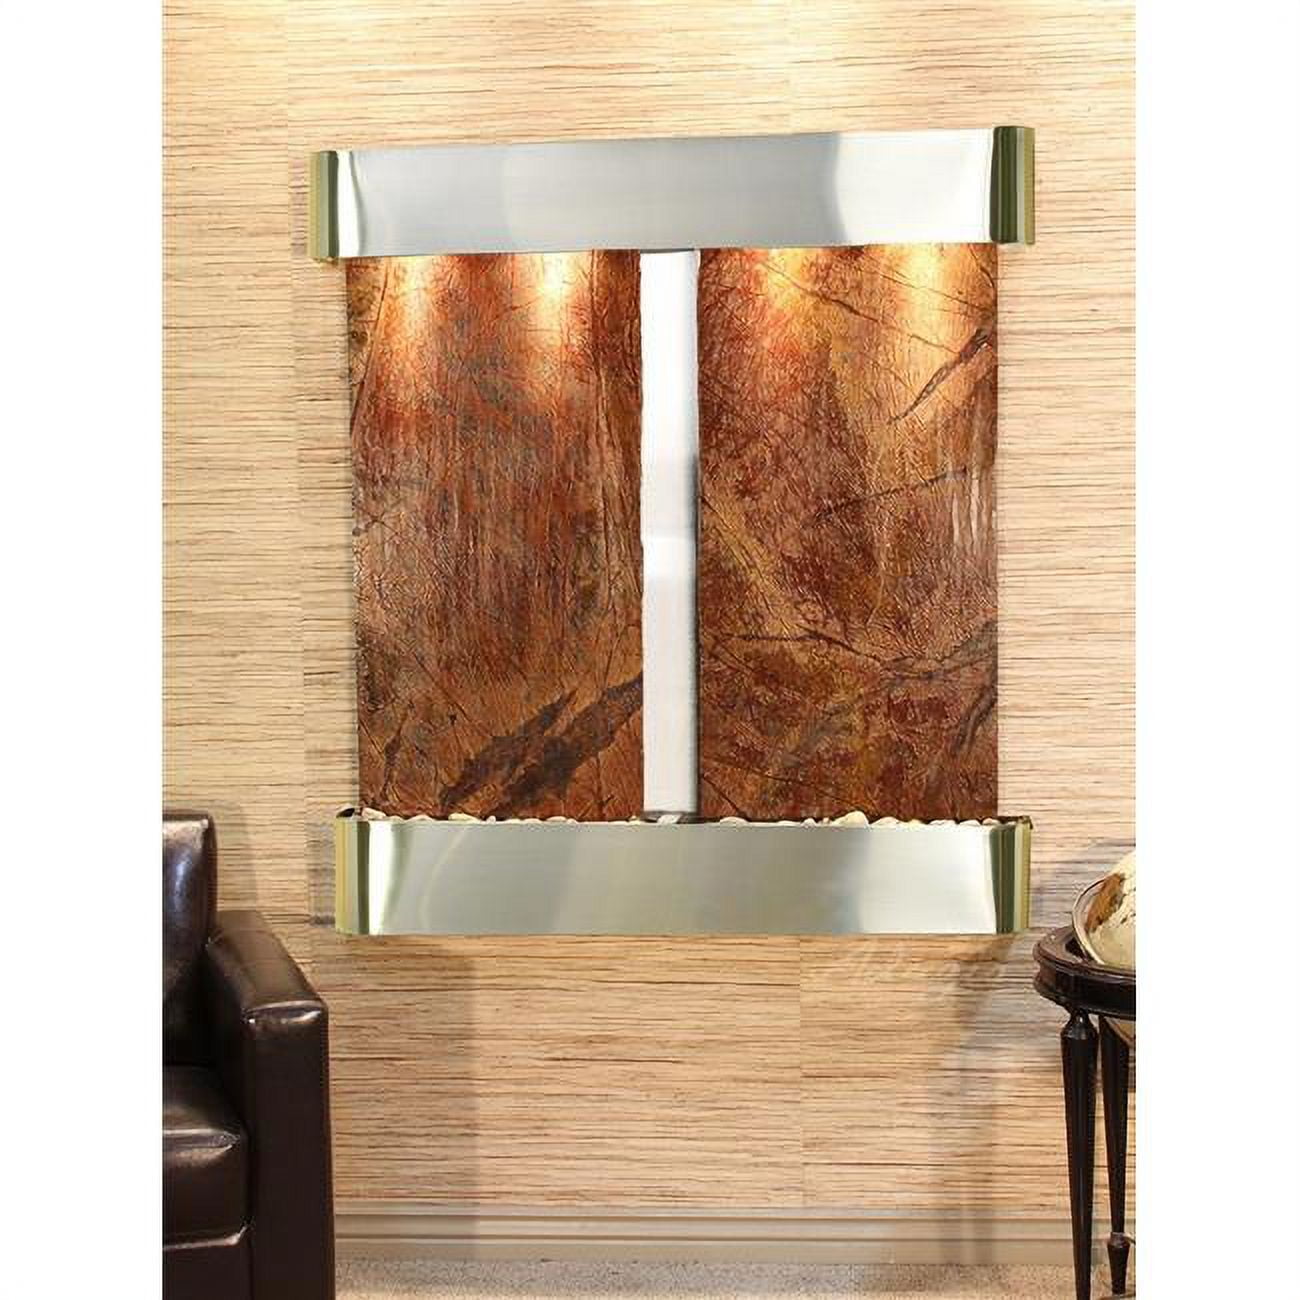 Picture of Adagio AFR2006 Aspen Falls Round Wall Fountain - Stainless Steel-Brown Marble